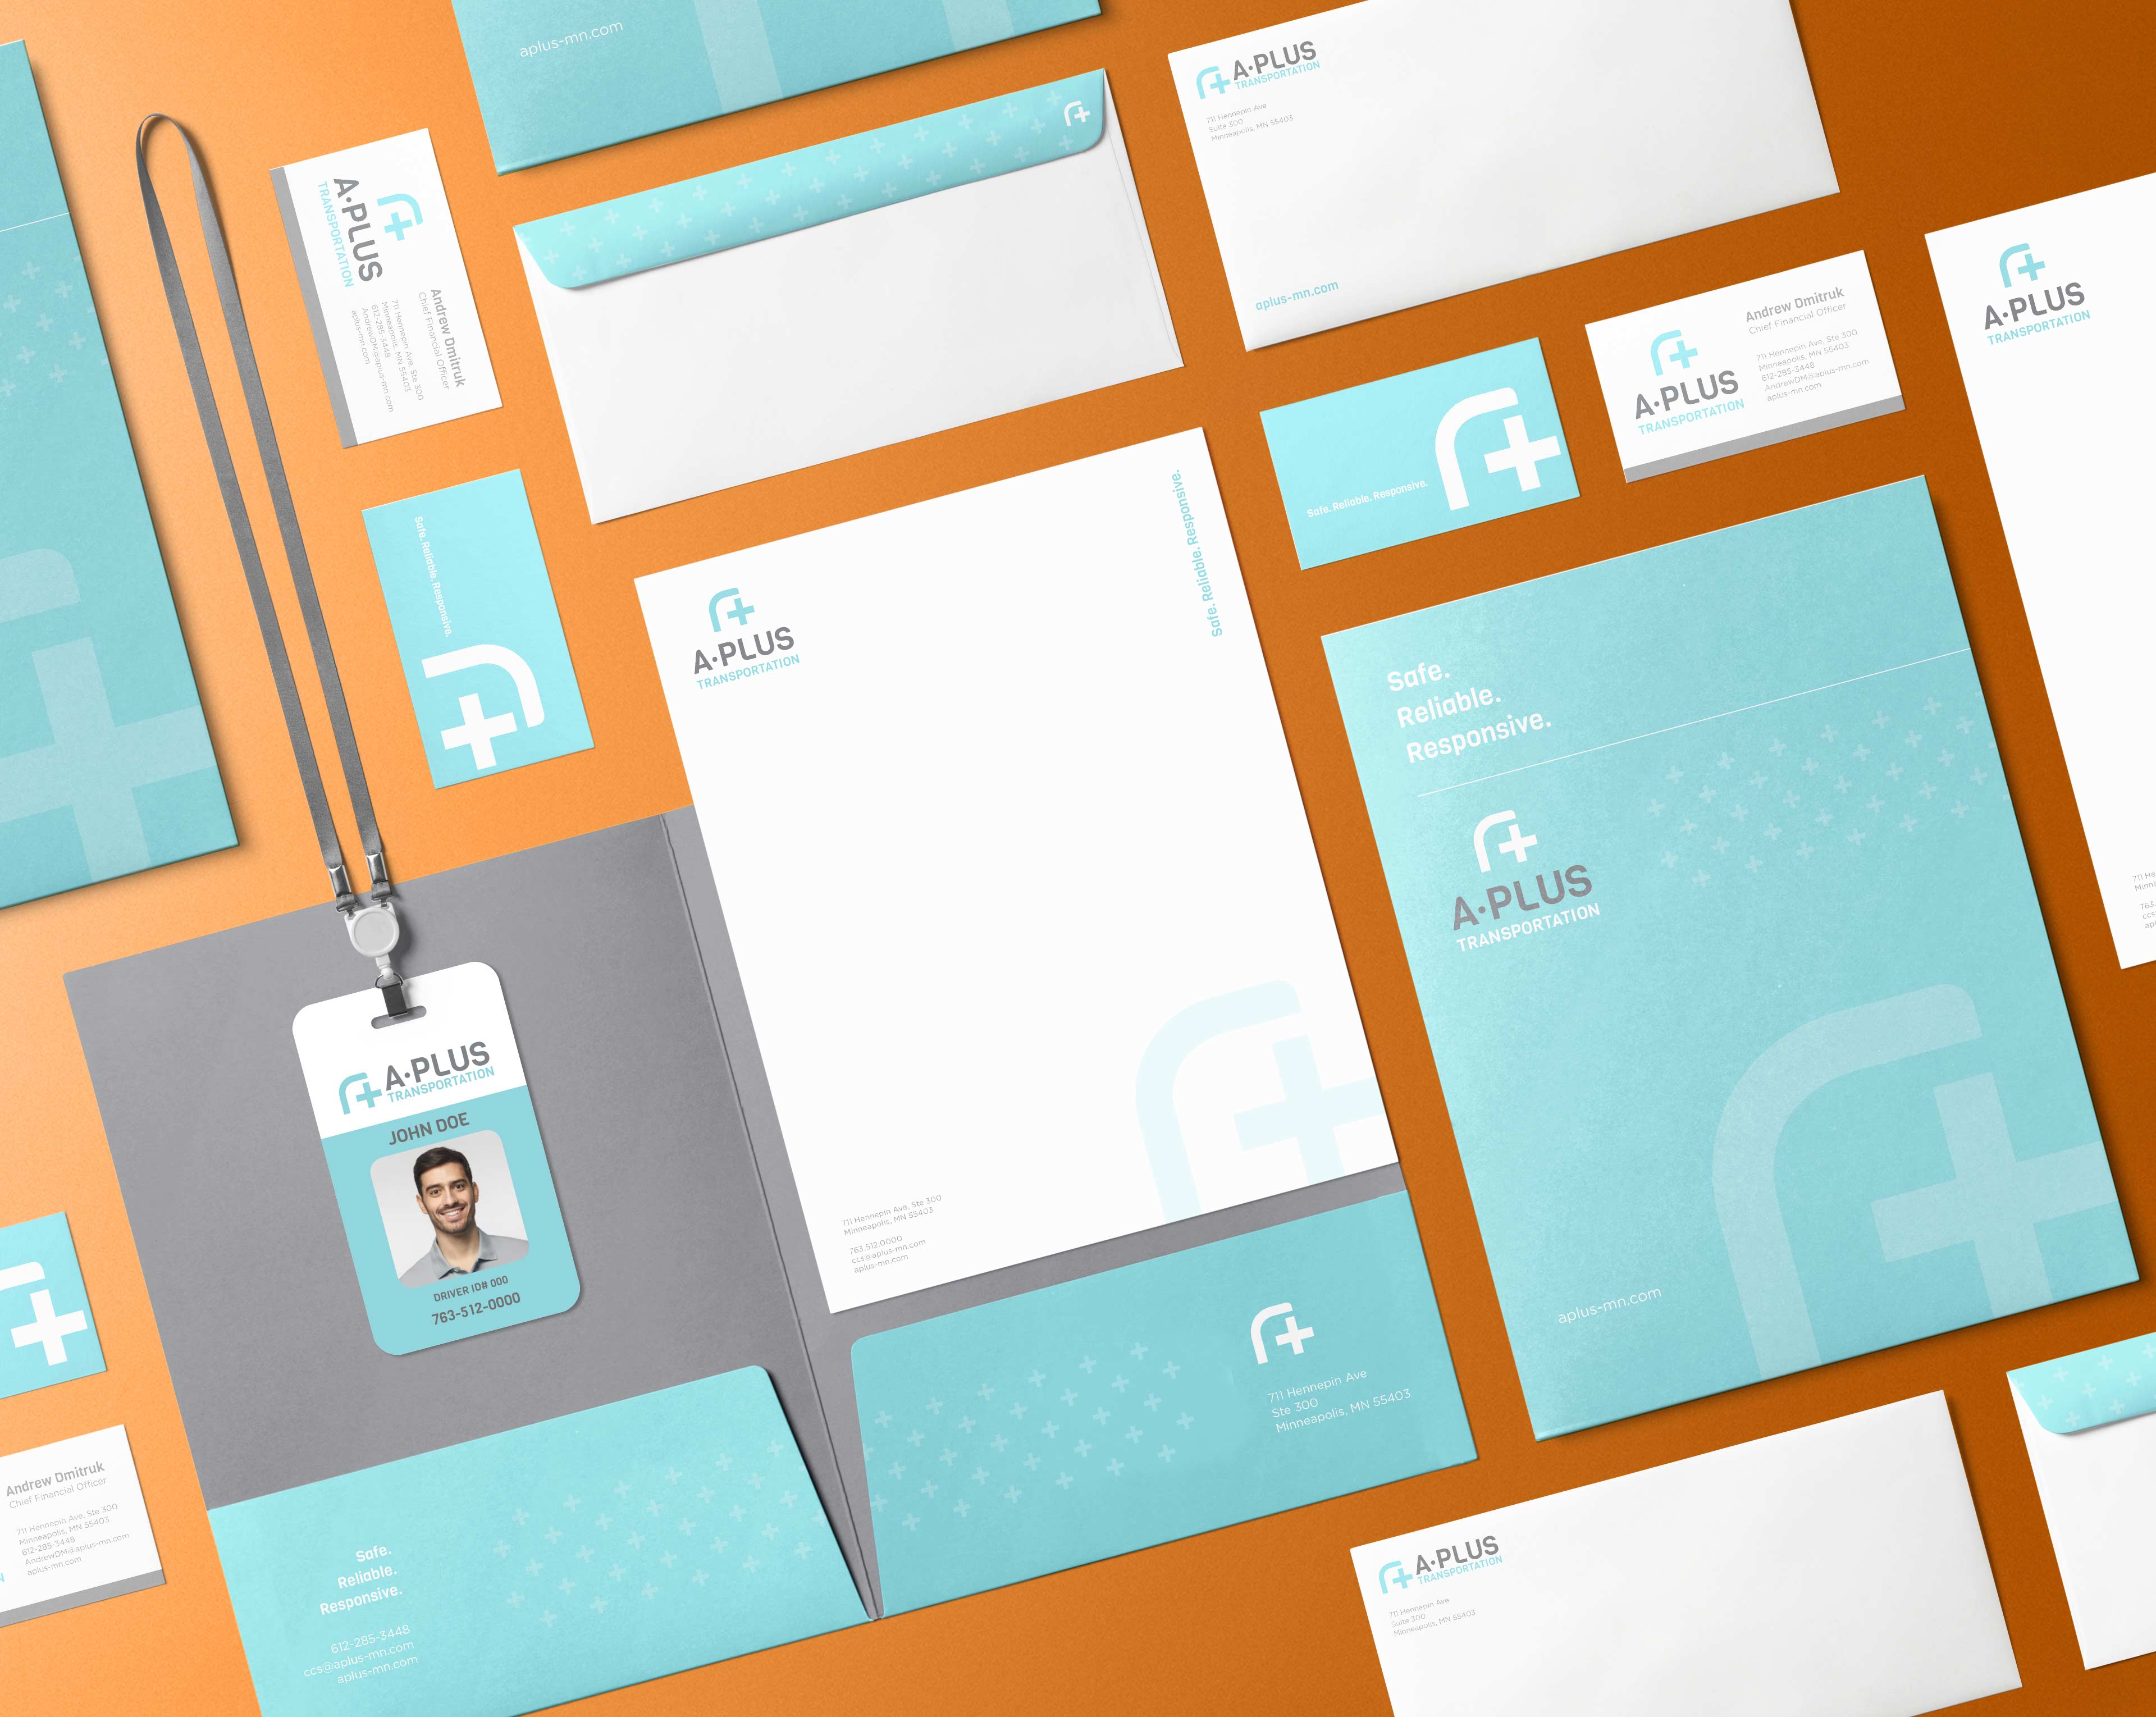 A spread of the A-Plus brand collateral includes letterhead, envelopes, business cards, a pocket folder and ID badge.